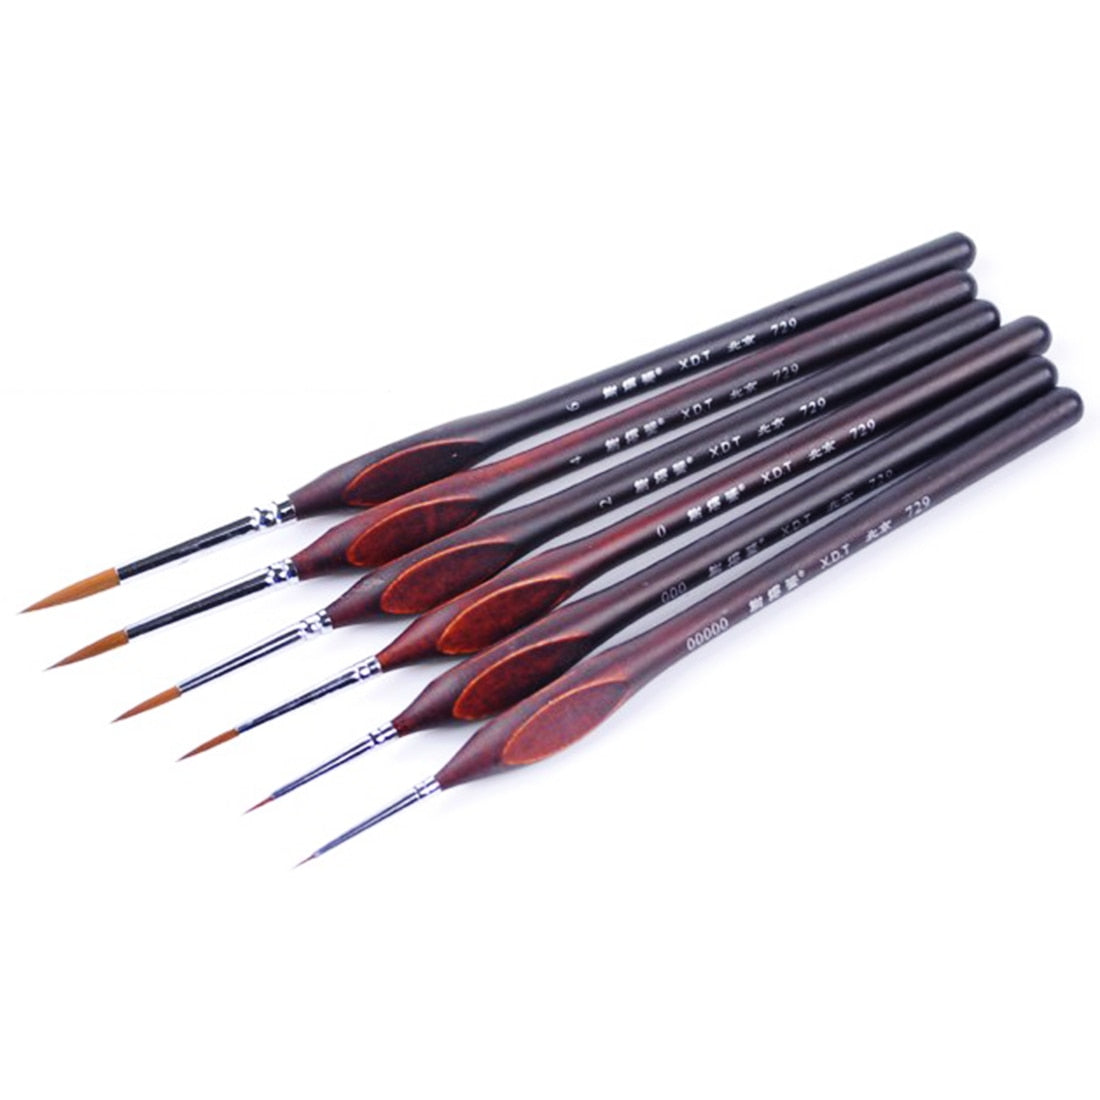 Miniature Brush Set for paint by Numbers - 6Pcs